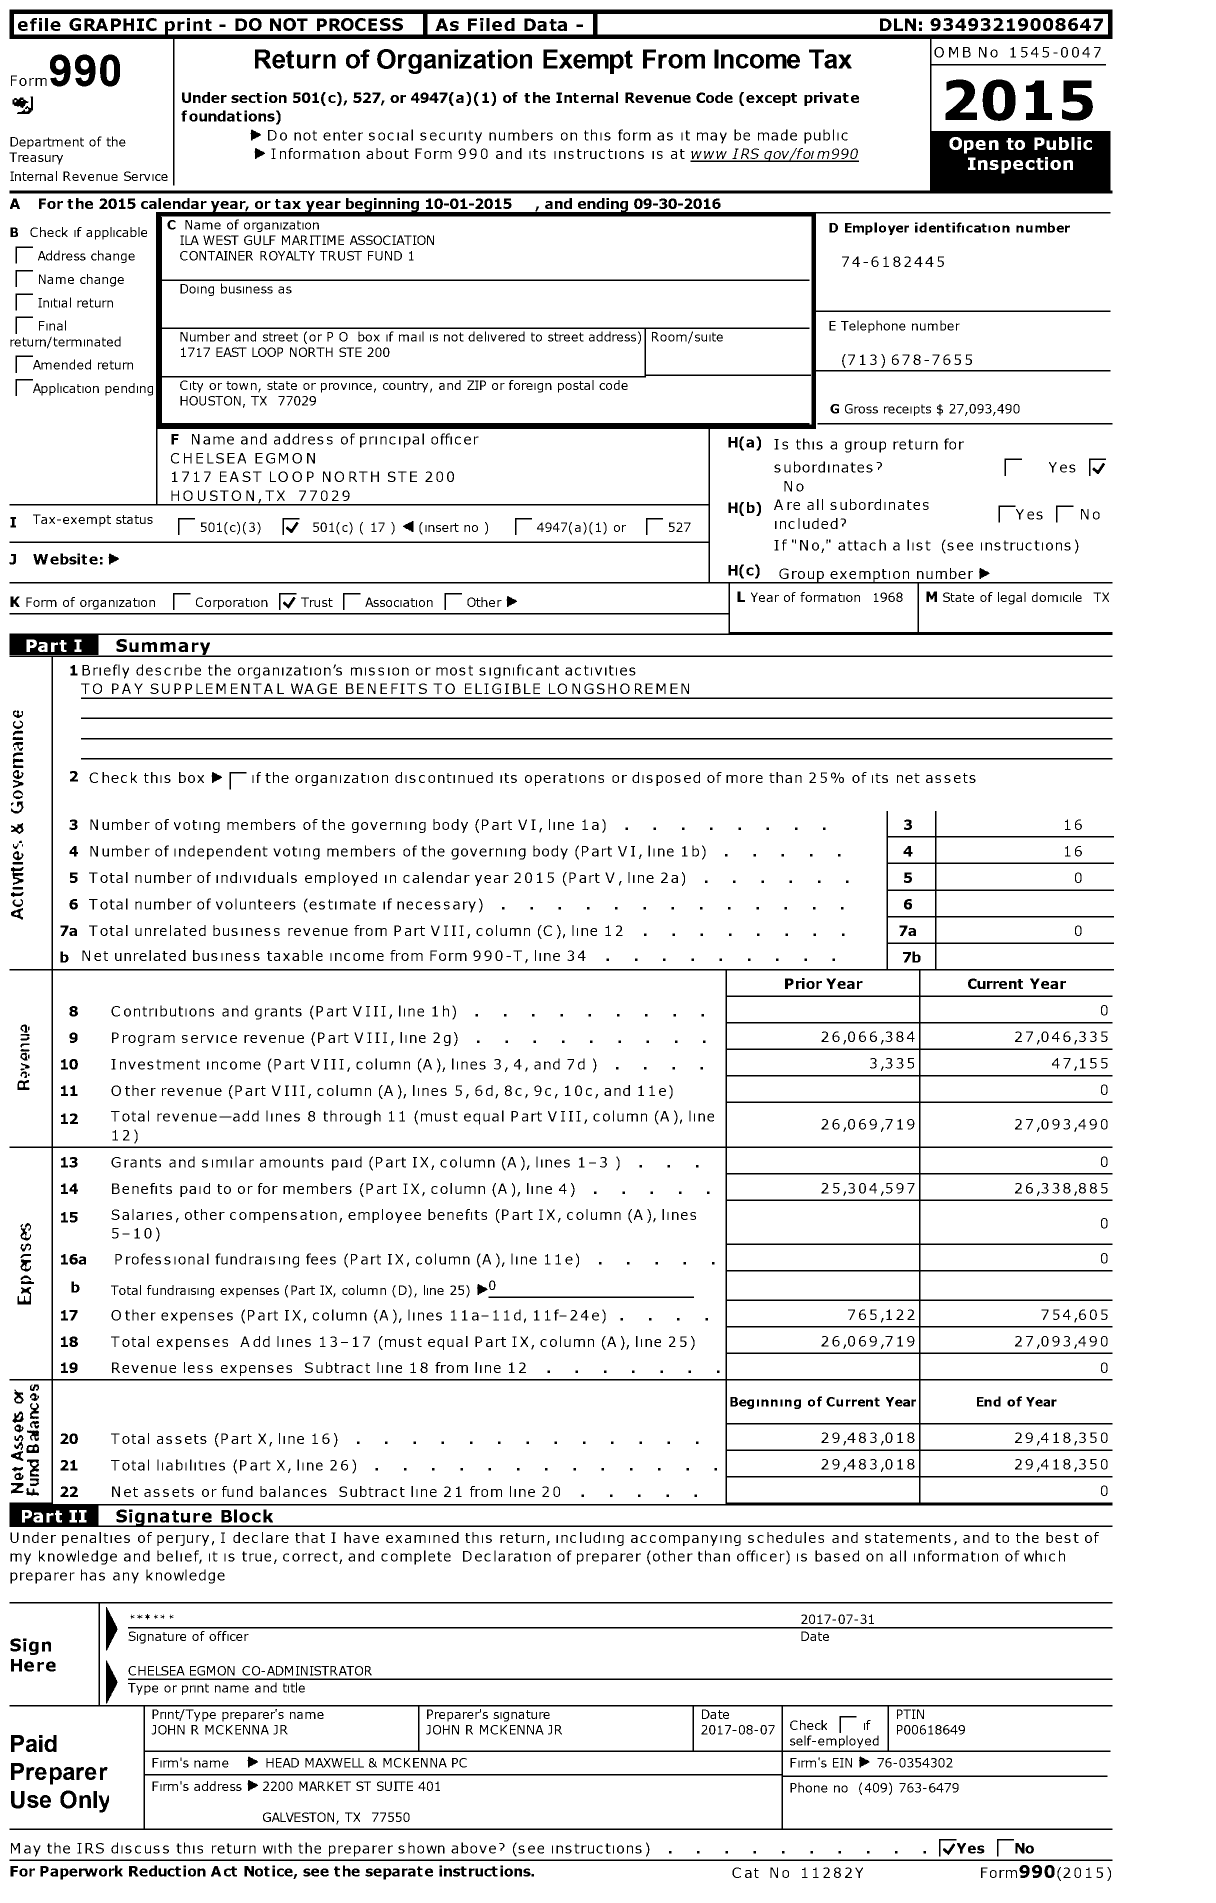 Image of first page of 2015 Form 990O for Ila West Gulf Maritime Association Container Royalty Trust Fund 1